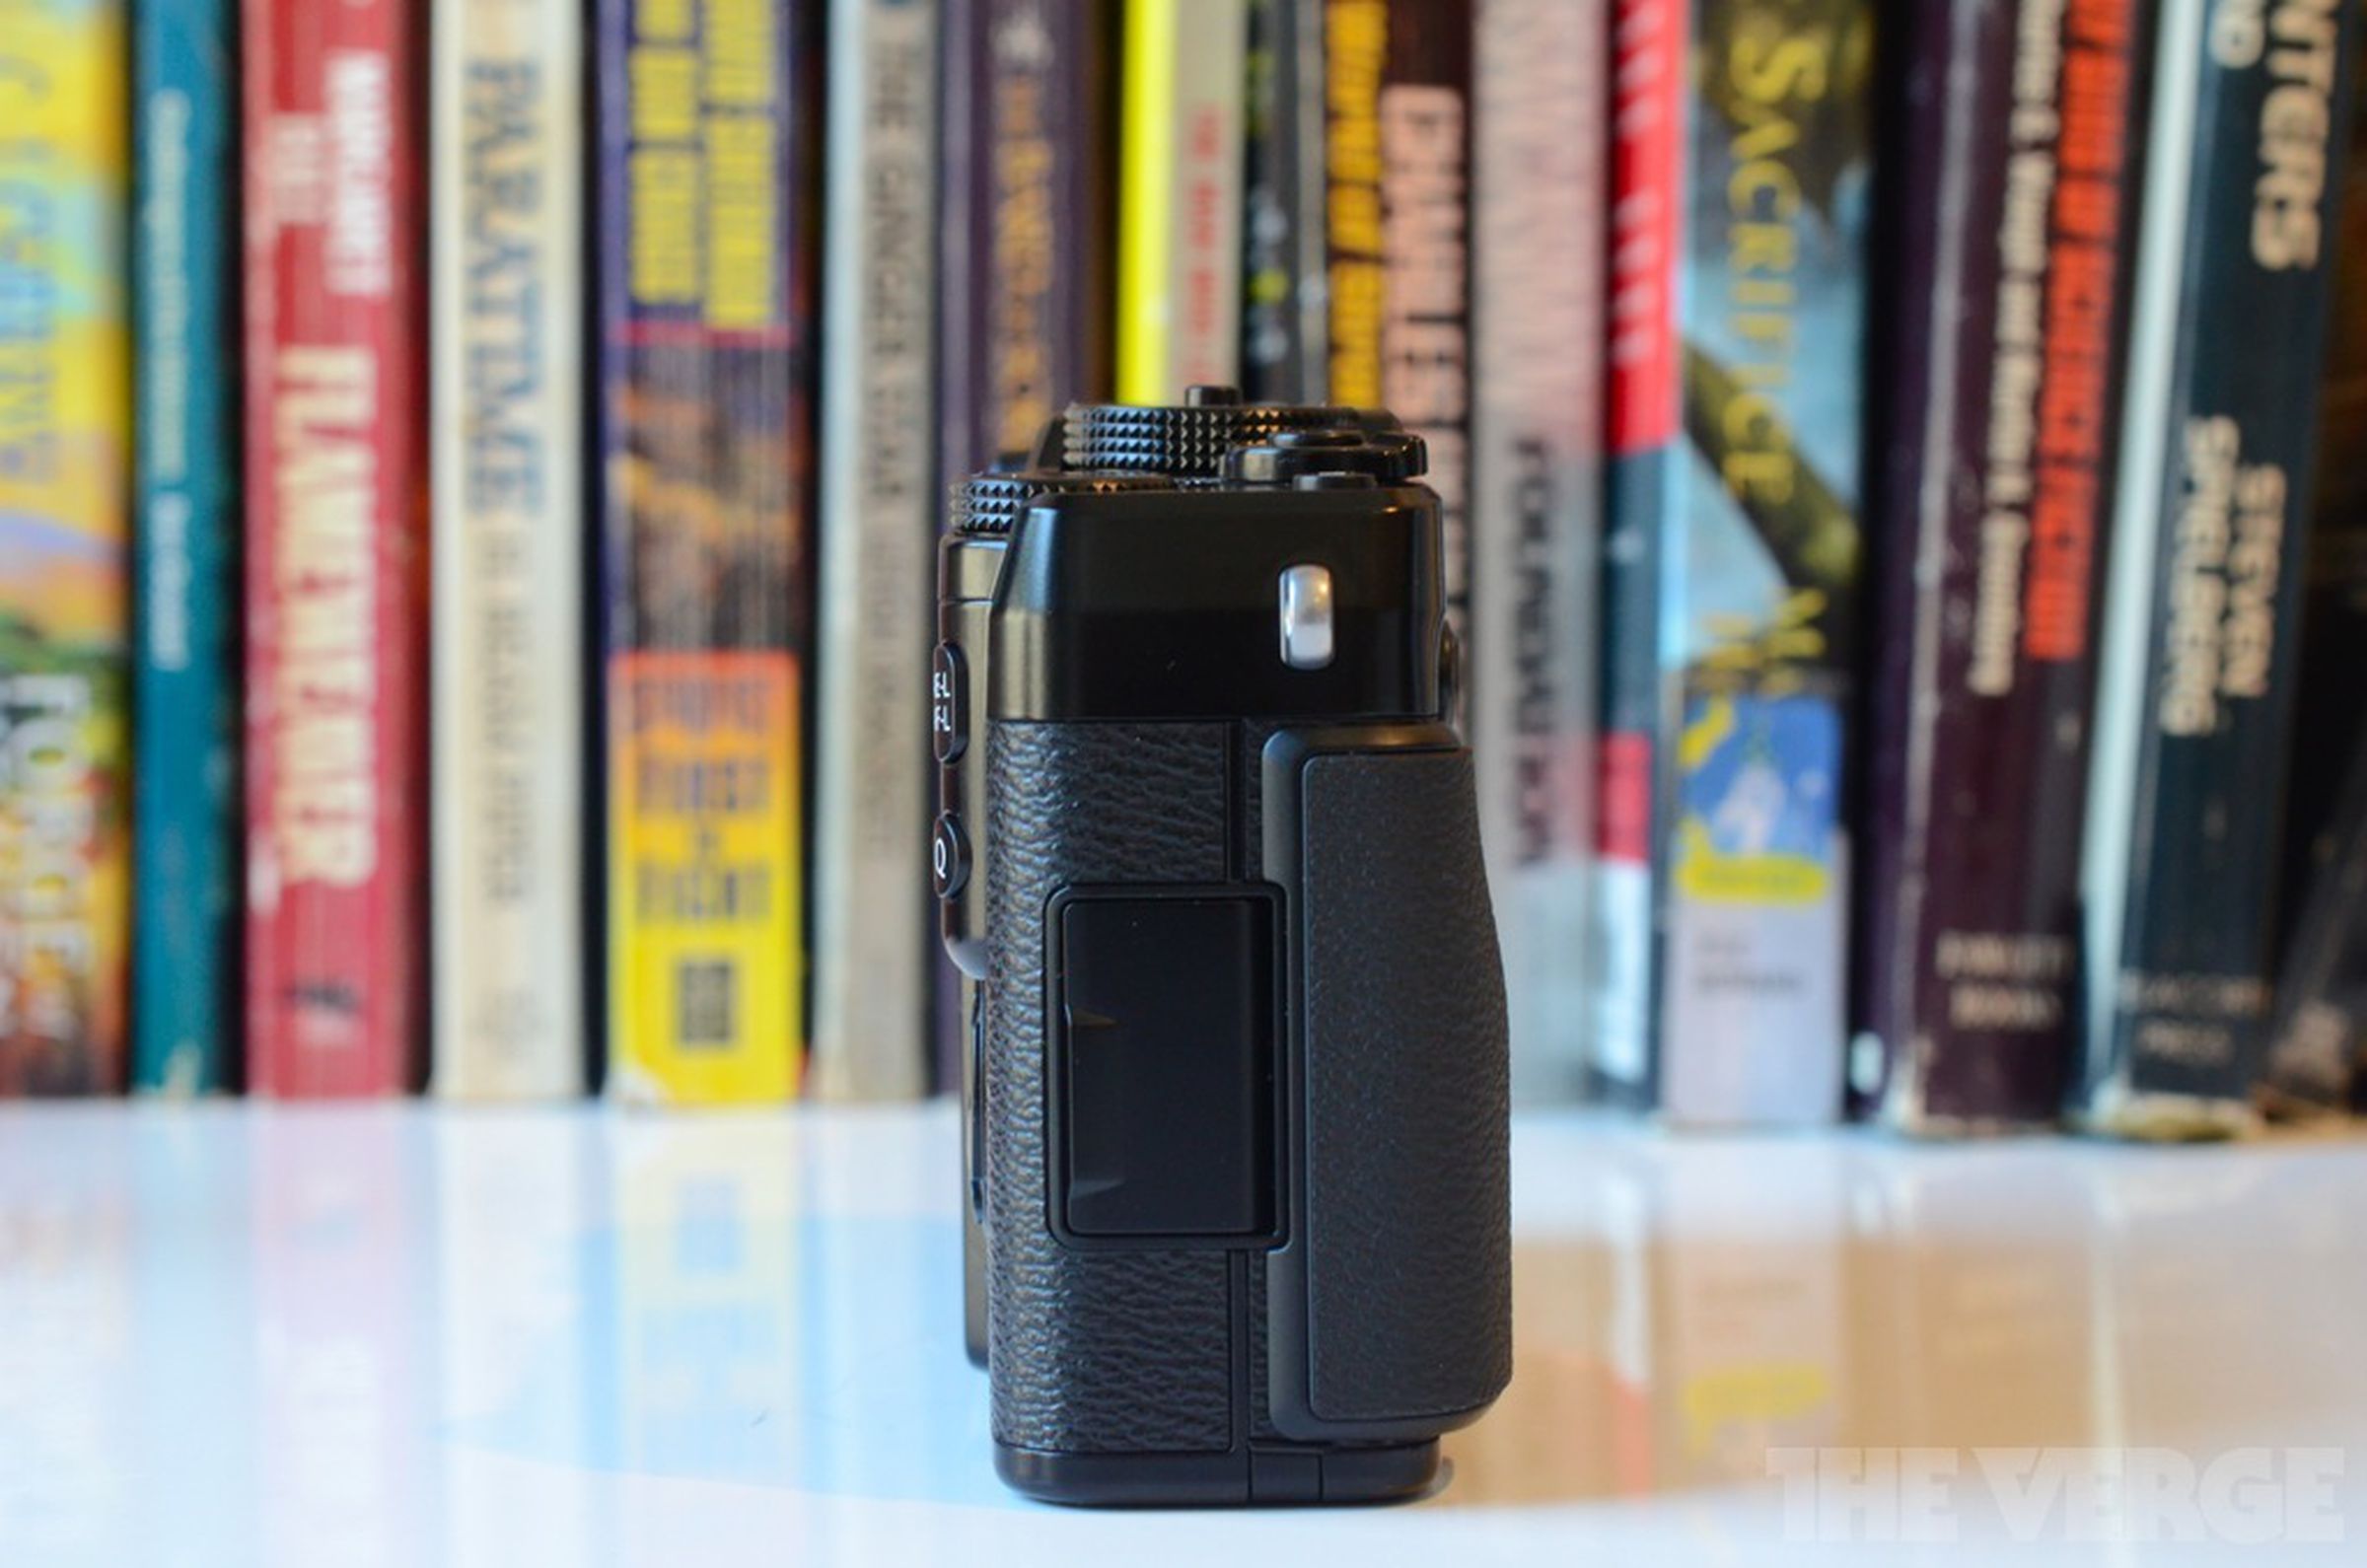 Fujifilm X-Pro1 review pictures